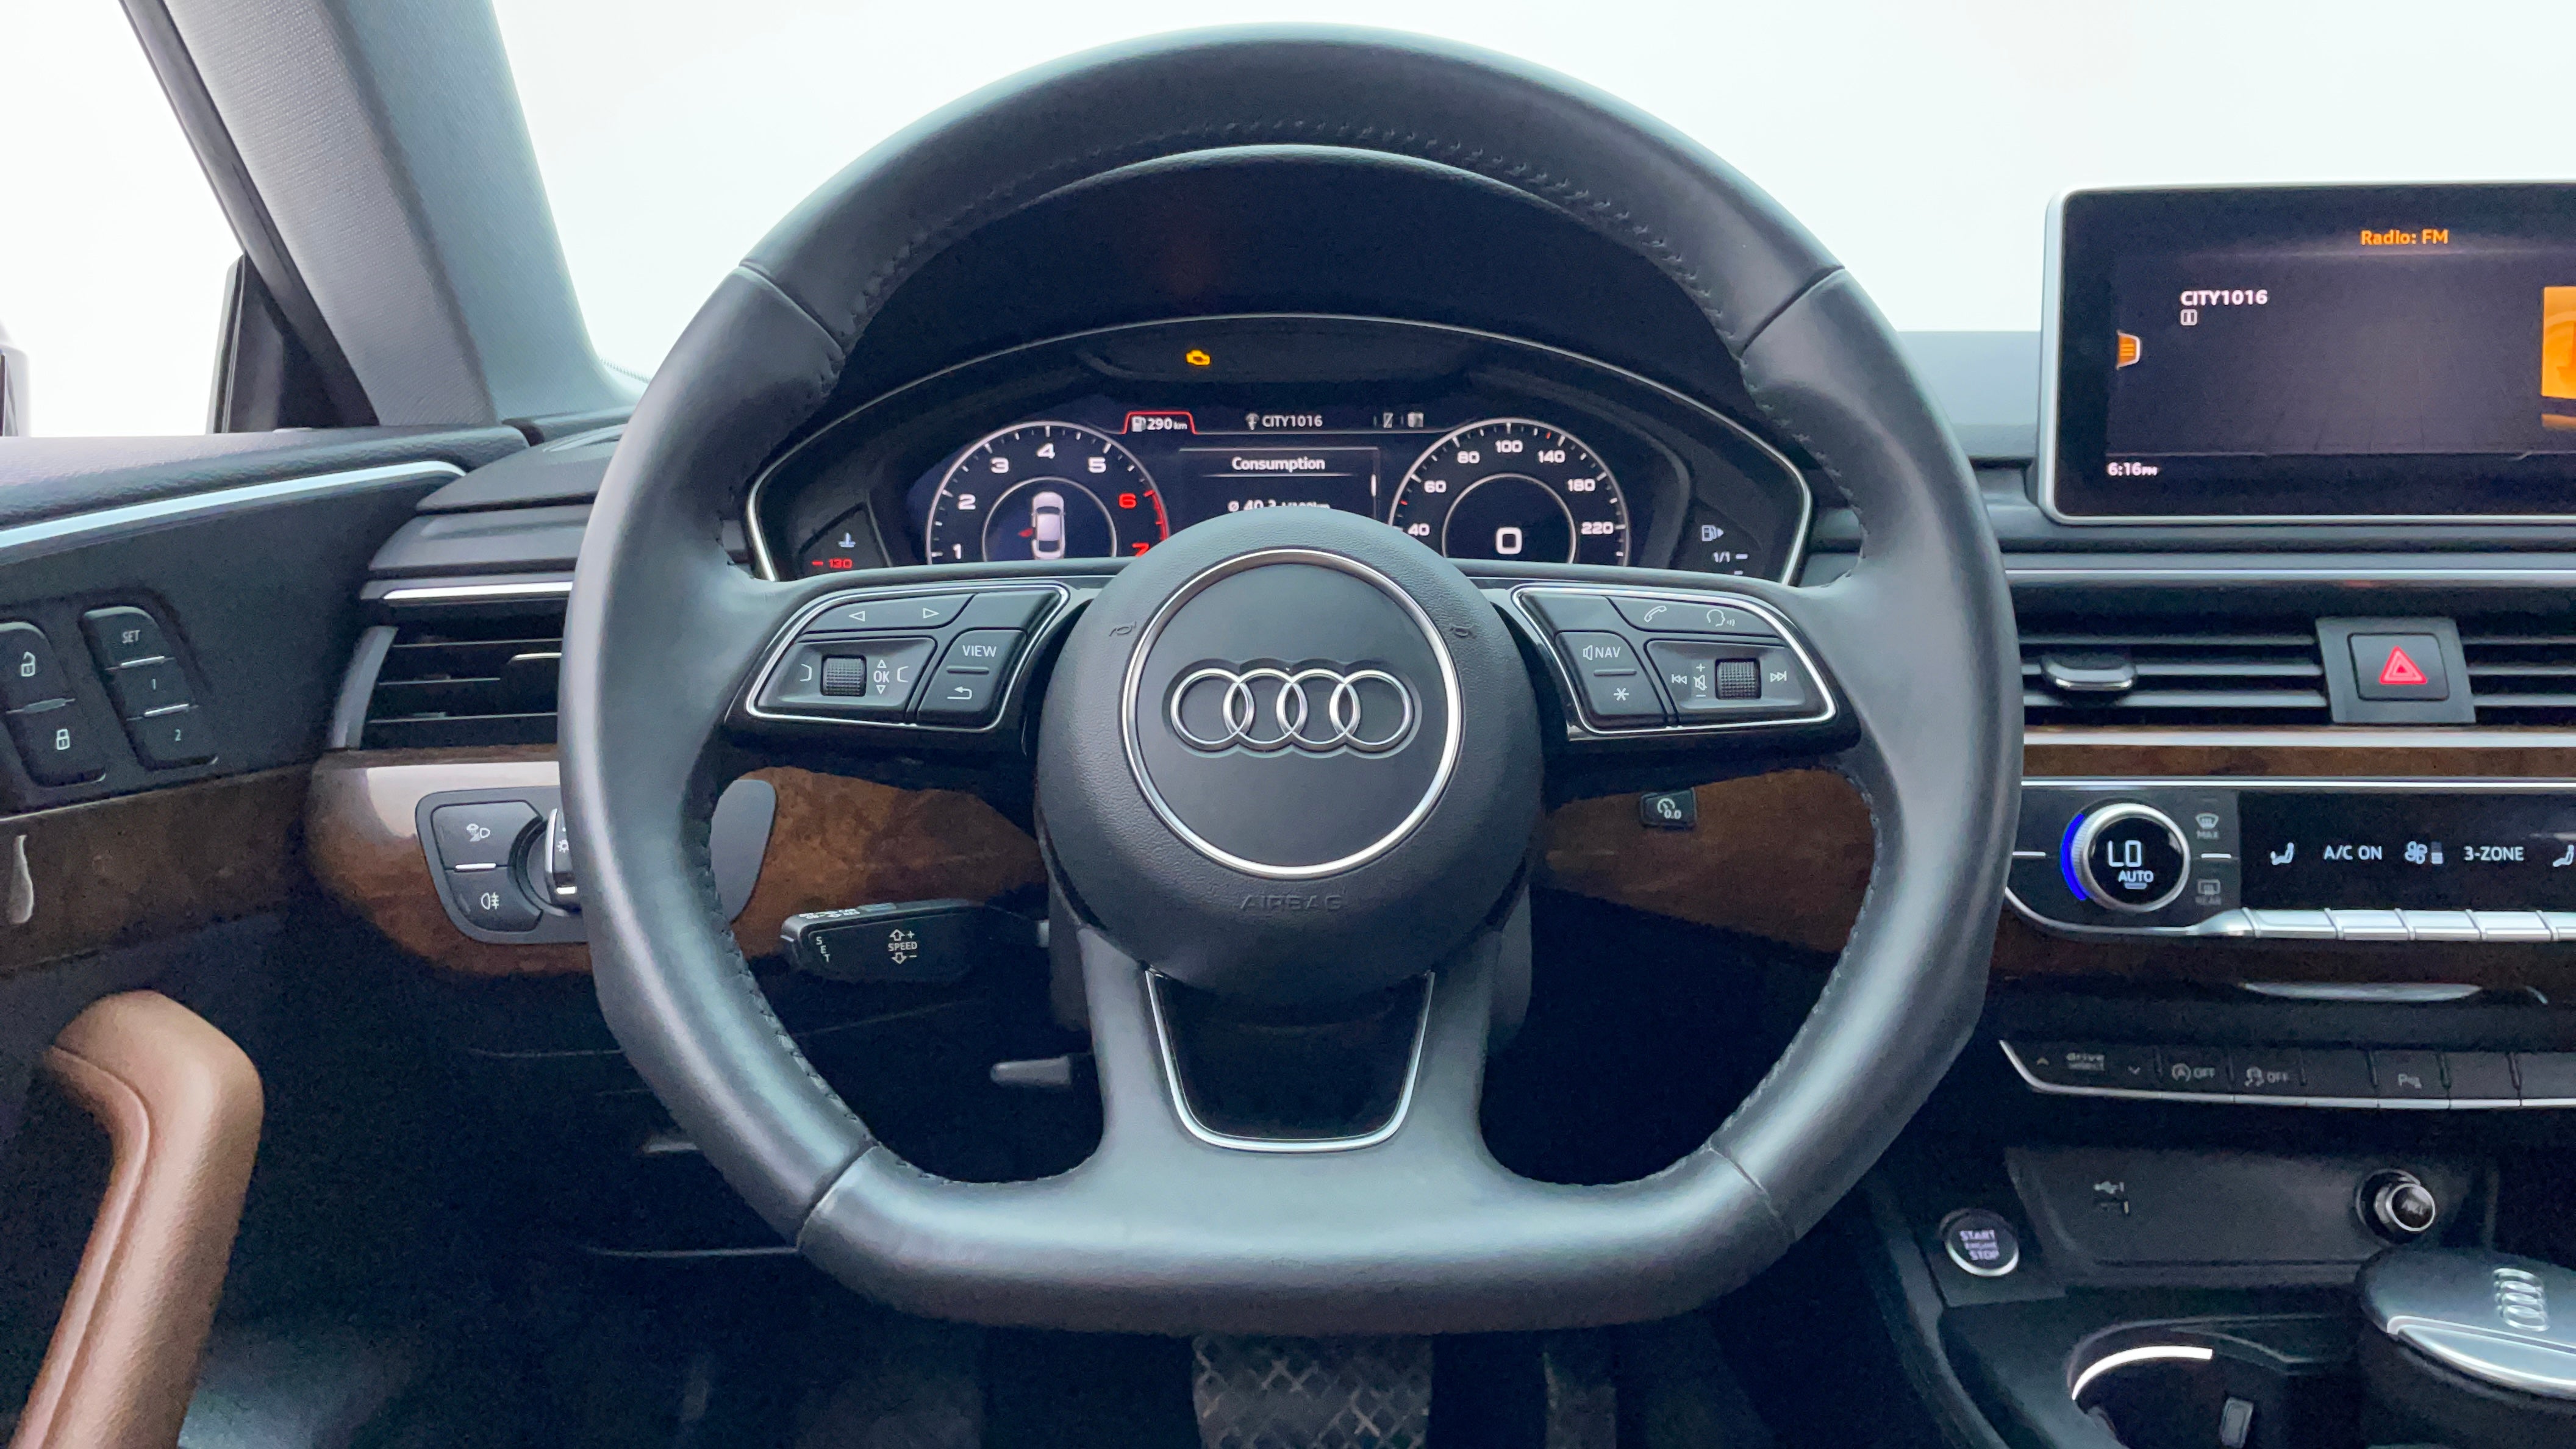 Audi A5-Steering Wheel Close-up